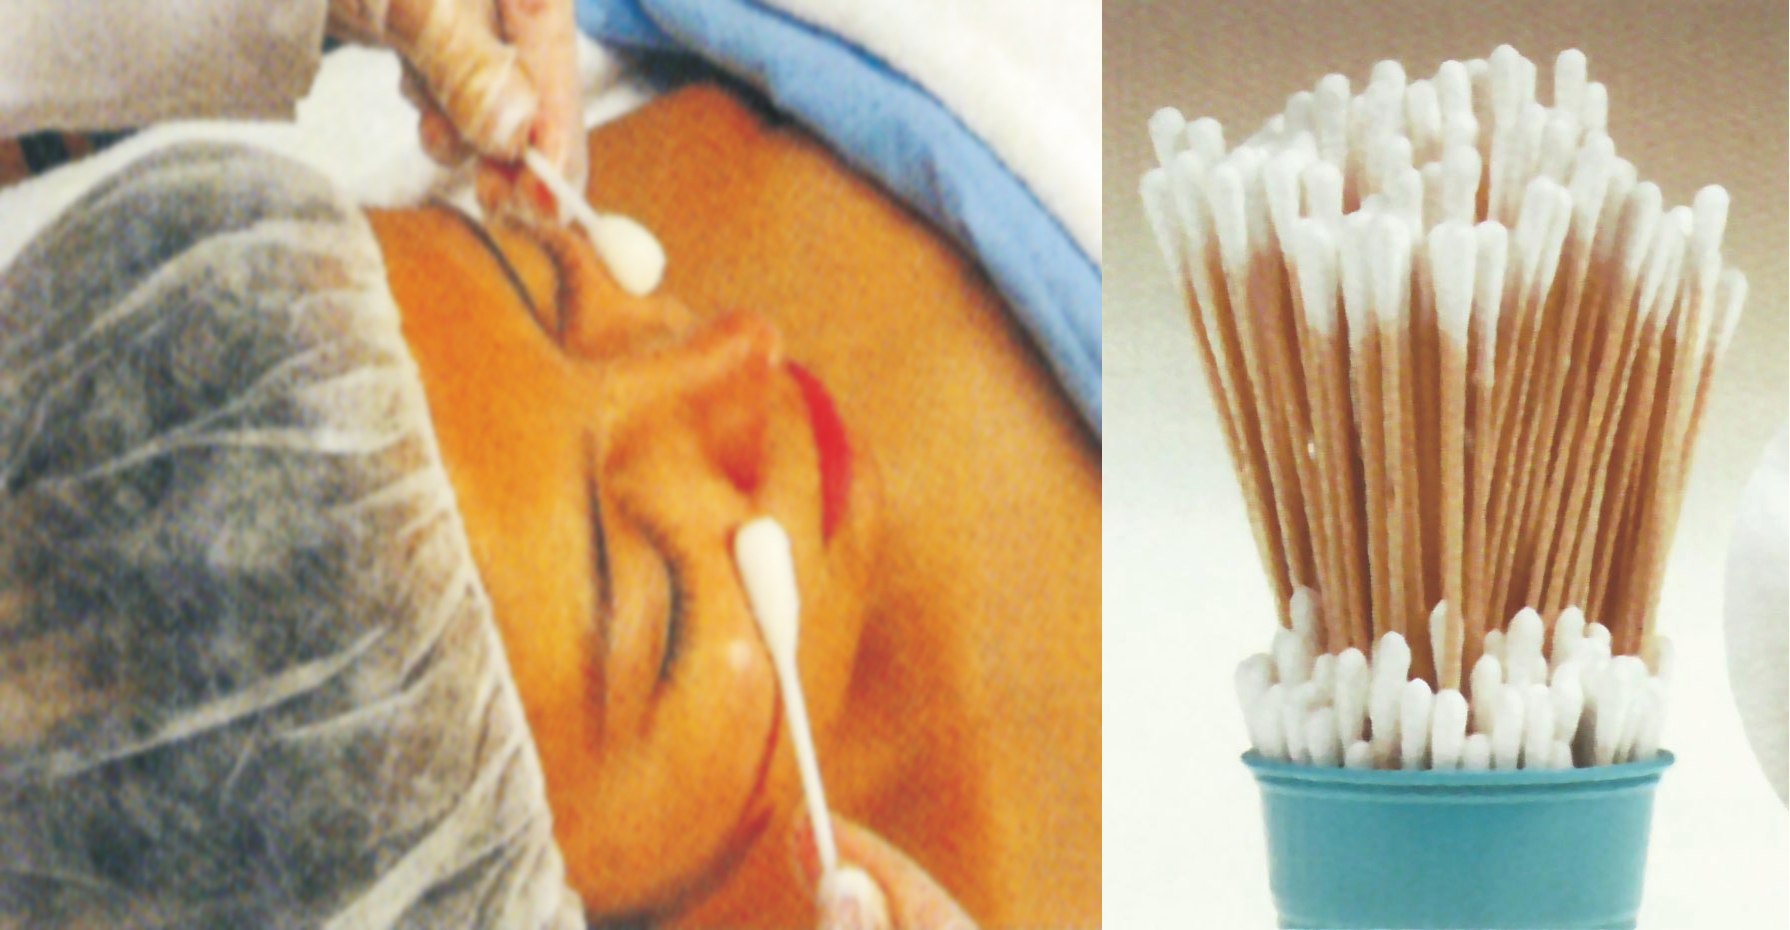 Hot sale medical wood stick Cotton Tipped Applicators, available for different sterilization ways